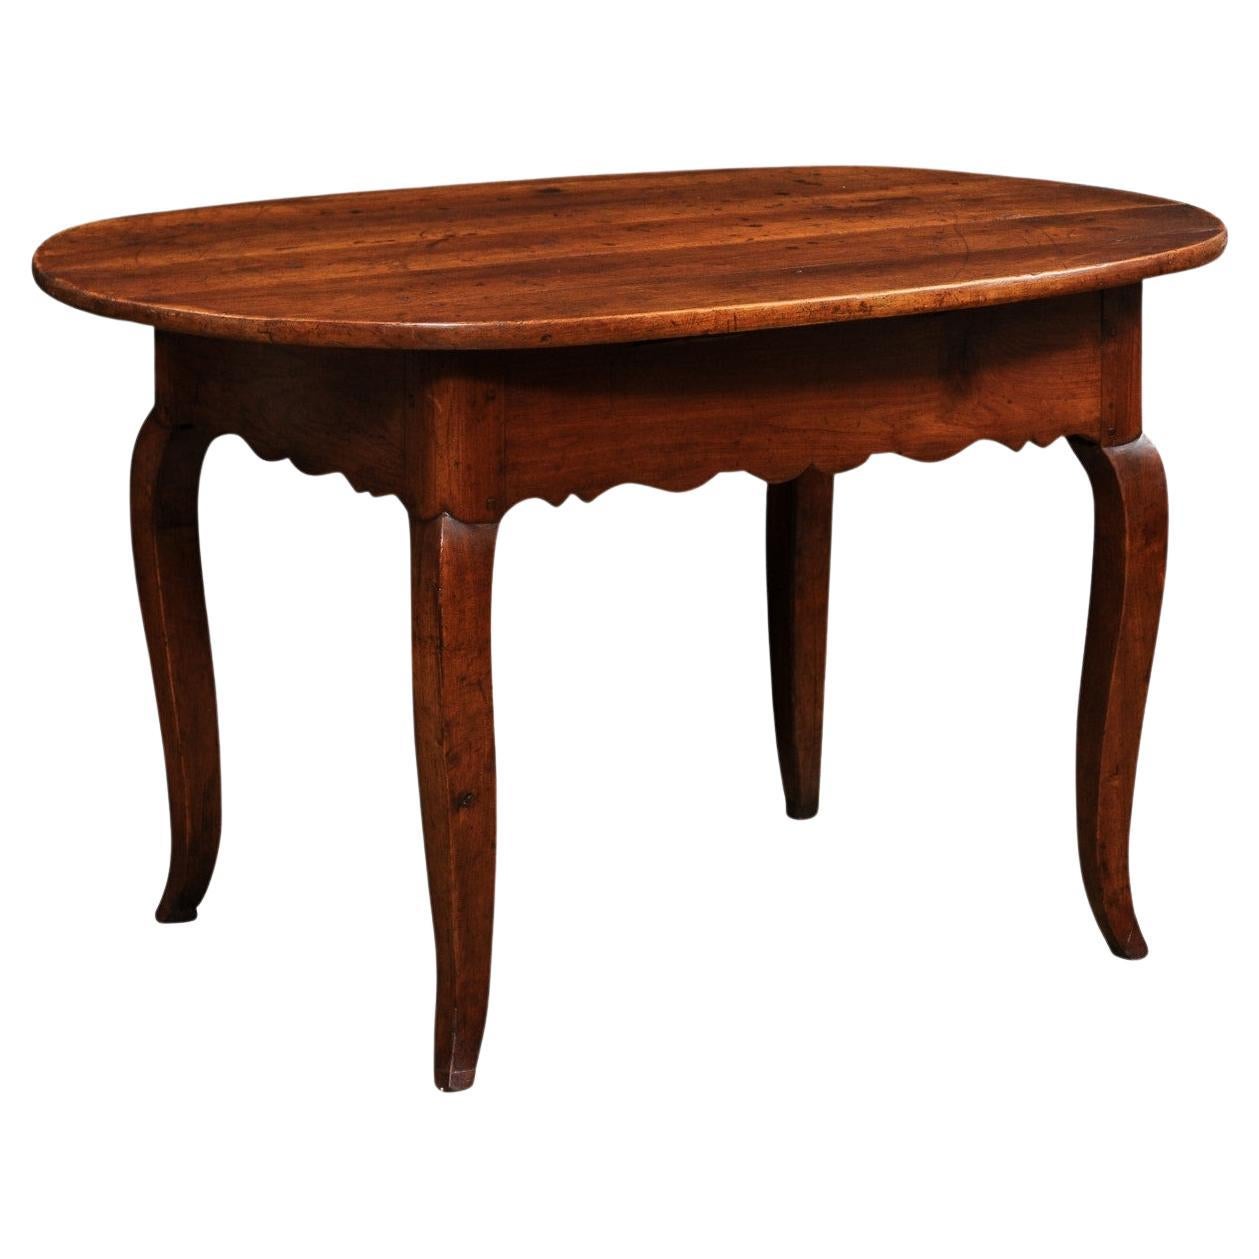 French 1830s Louis XV Style Center Table with Cabriole Legs and Carved Apron